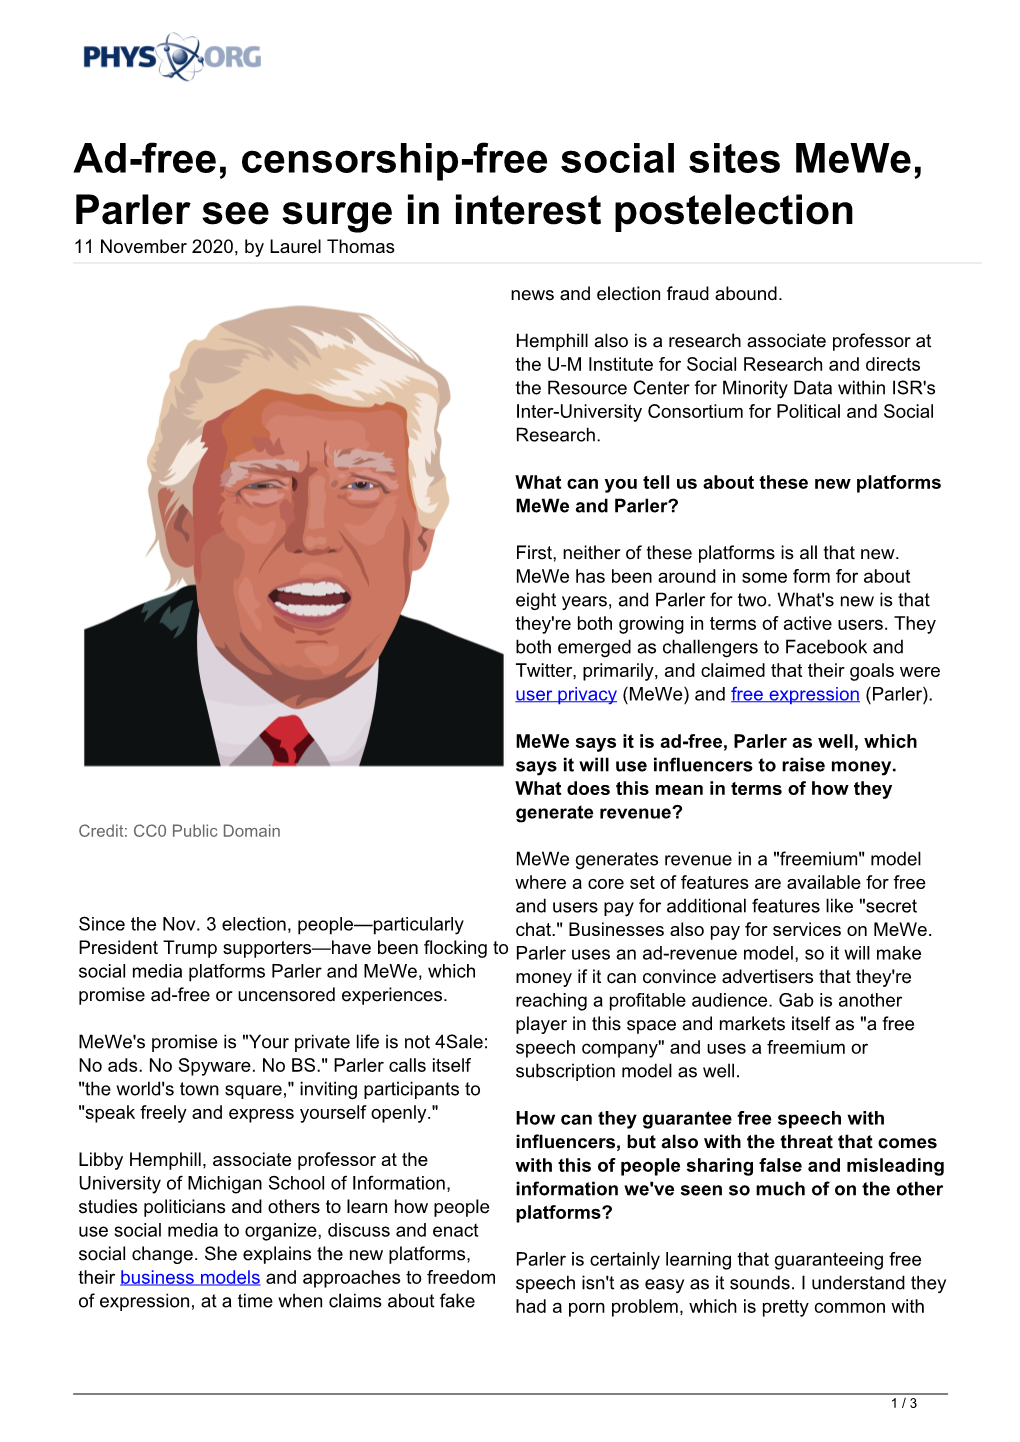 Ad-Free, Censorship-Free Social Sites Mewe, Parler See Surge in Interest Postelection 11 November 2020, by Laurel Thomas